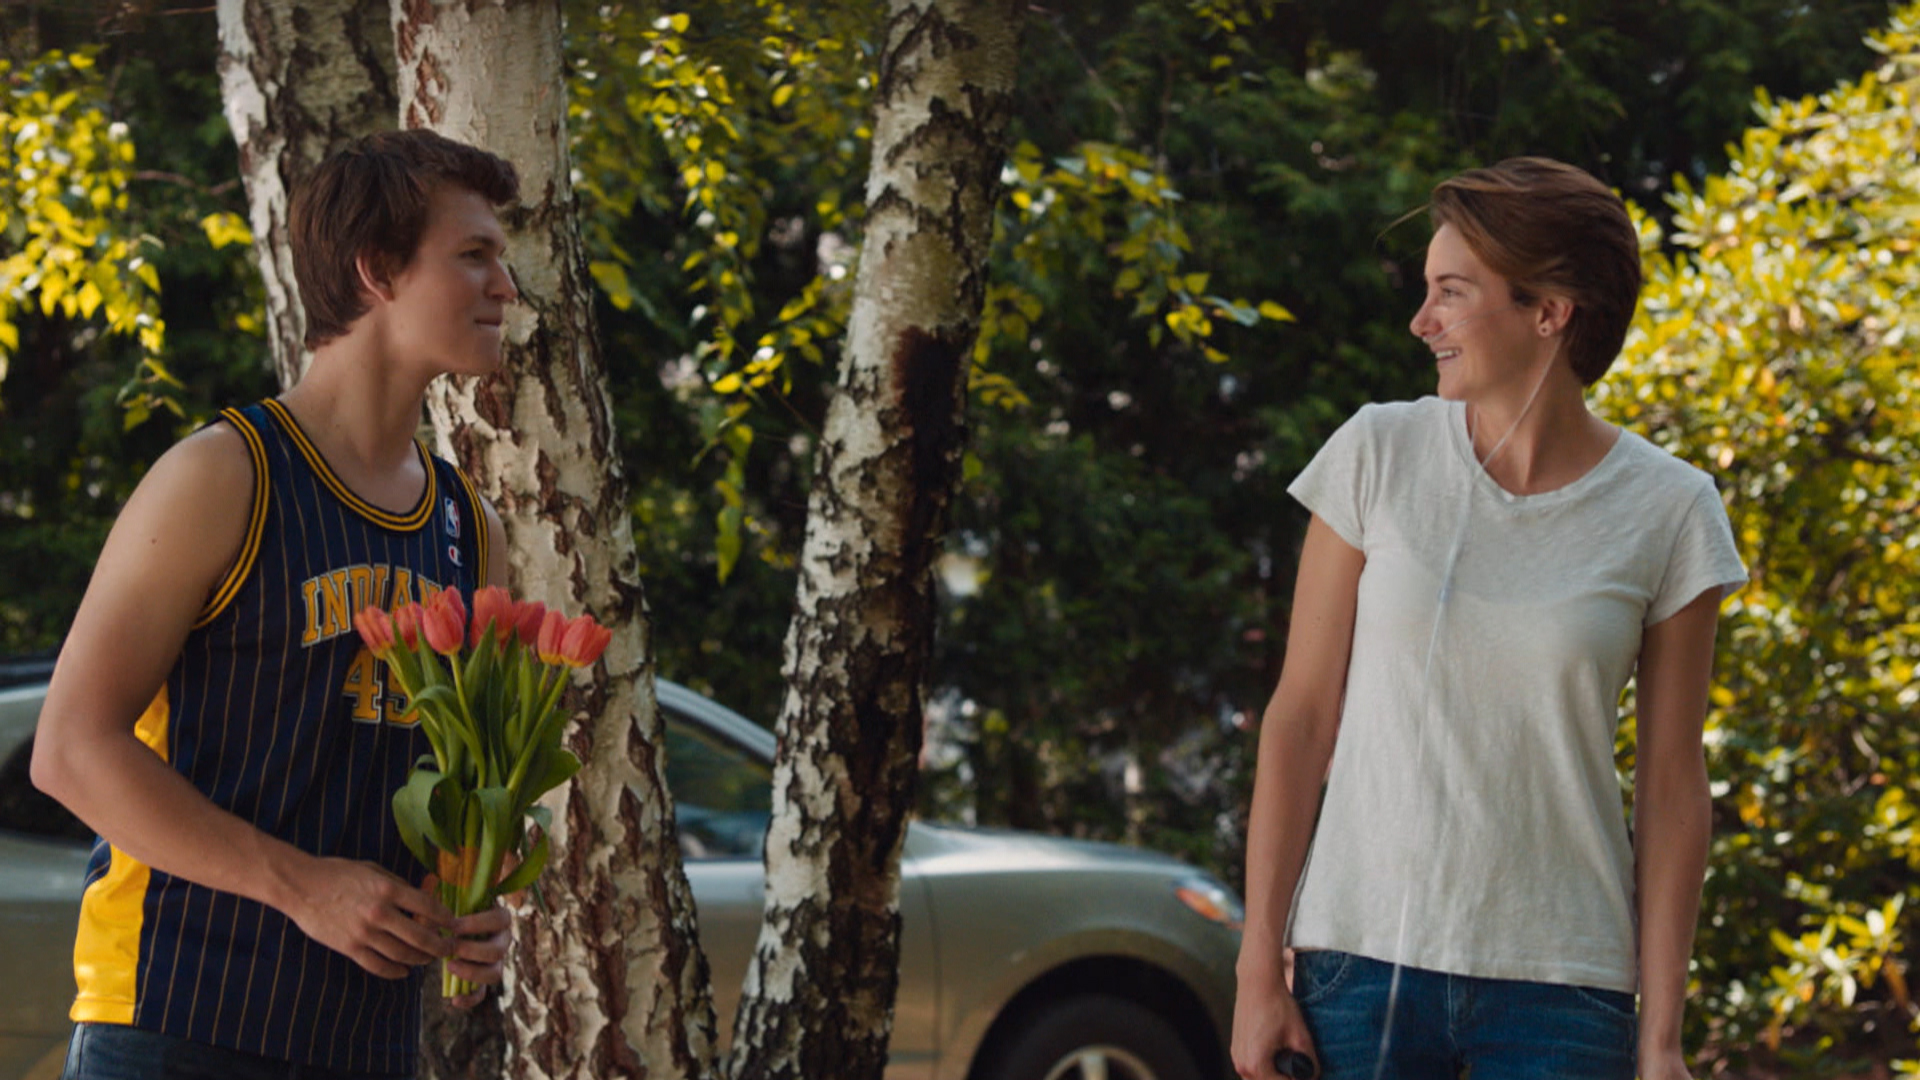 THEATRICAL REVIEW: The Fault in Our Stars | The Viewer's Commentary